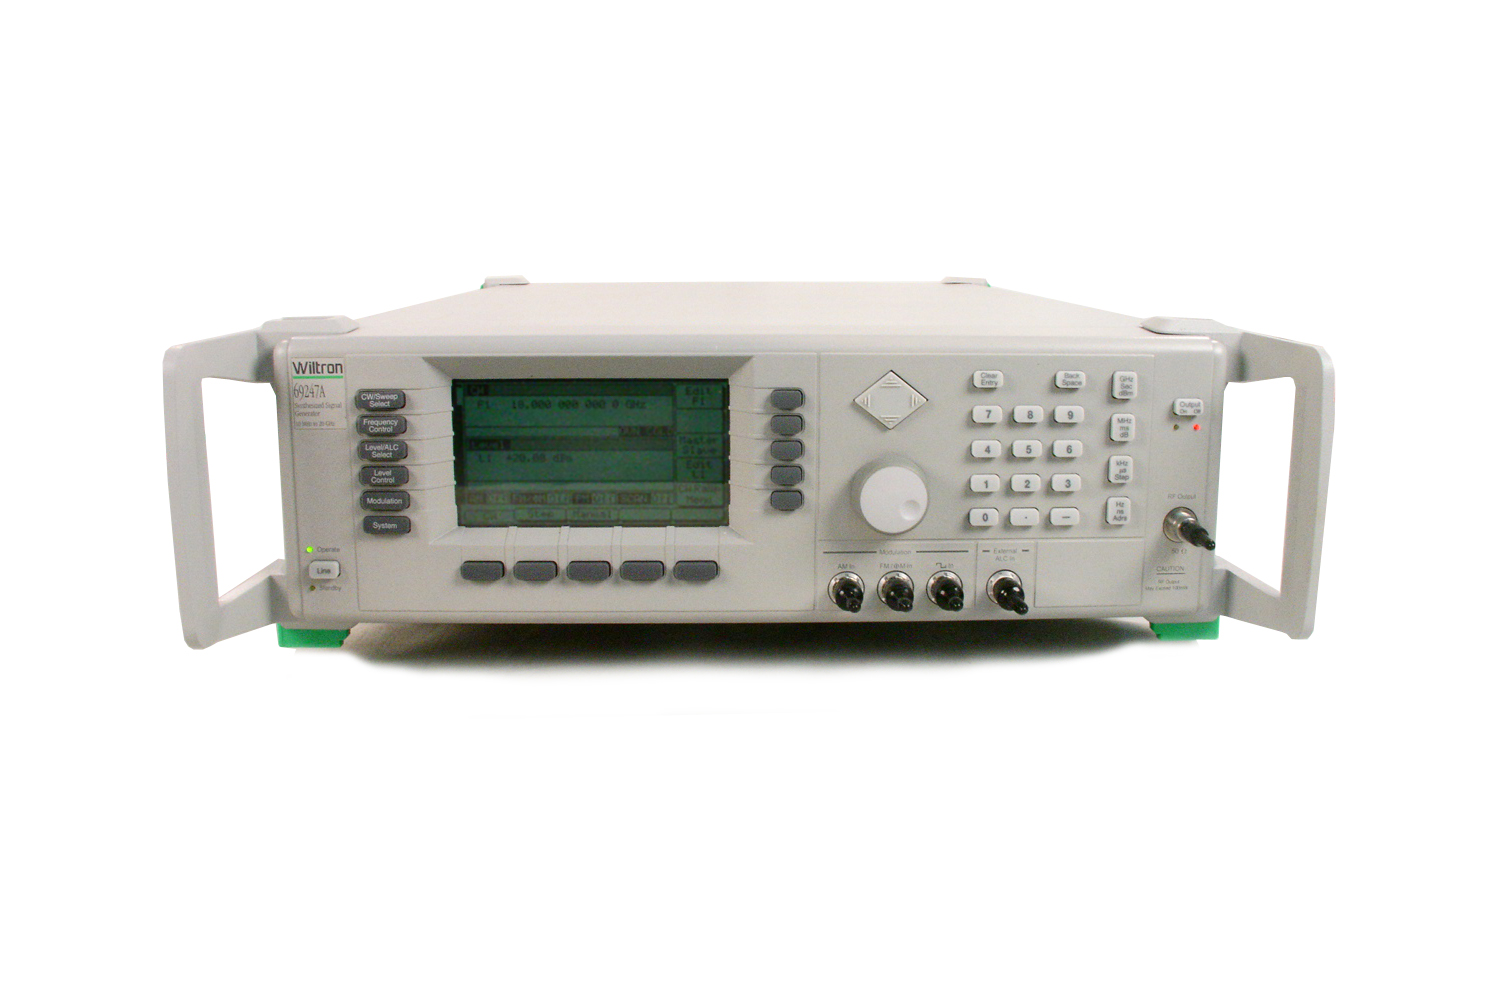 Similar product is Anritsu 69369A